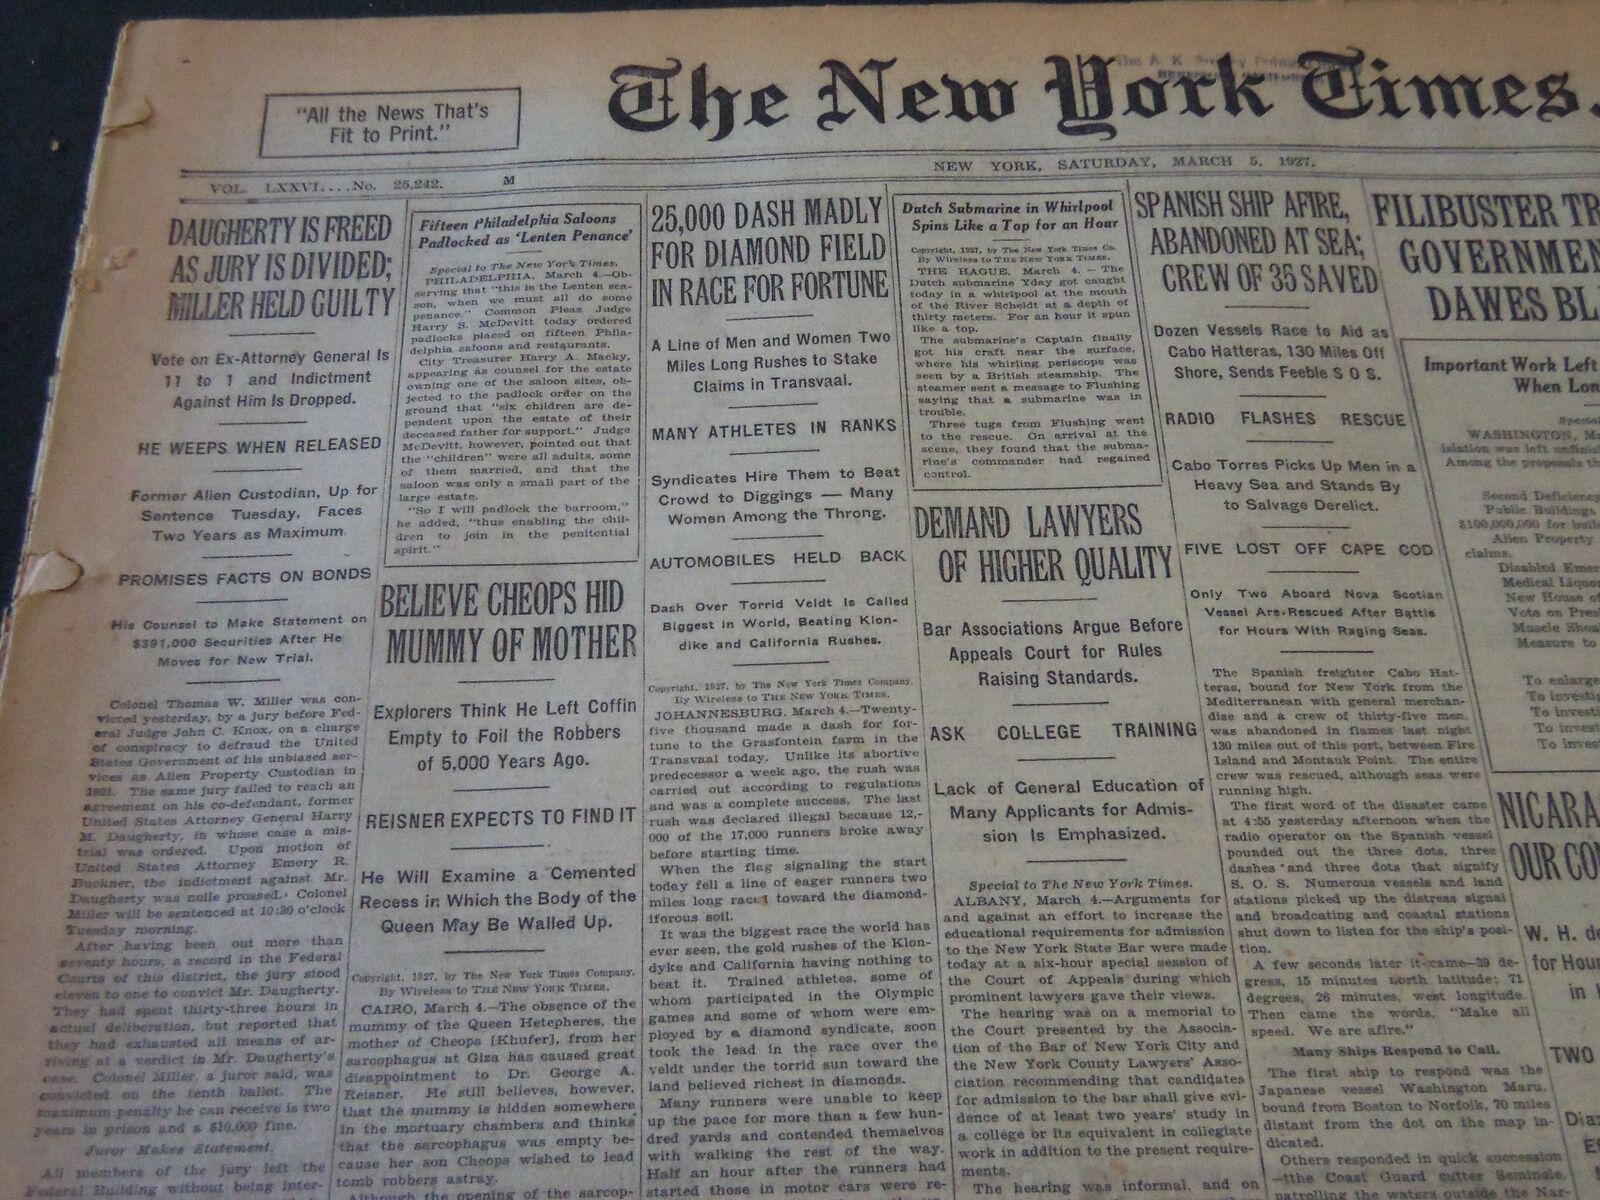 1927 MARCH 5 NEW YORK TIMES - BELIEVE CHEOPS HID MUMMY OF MOTHER - NT 5558